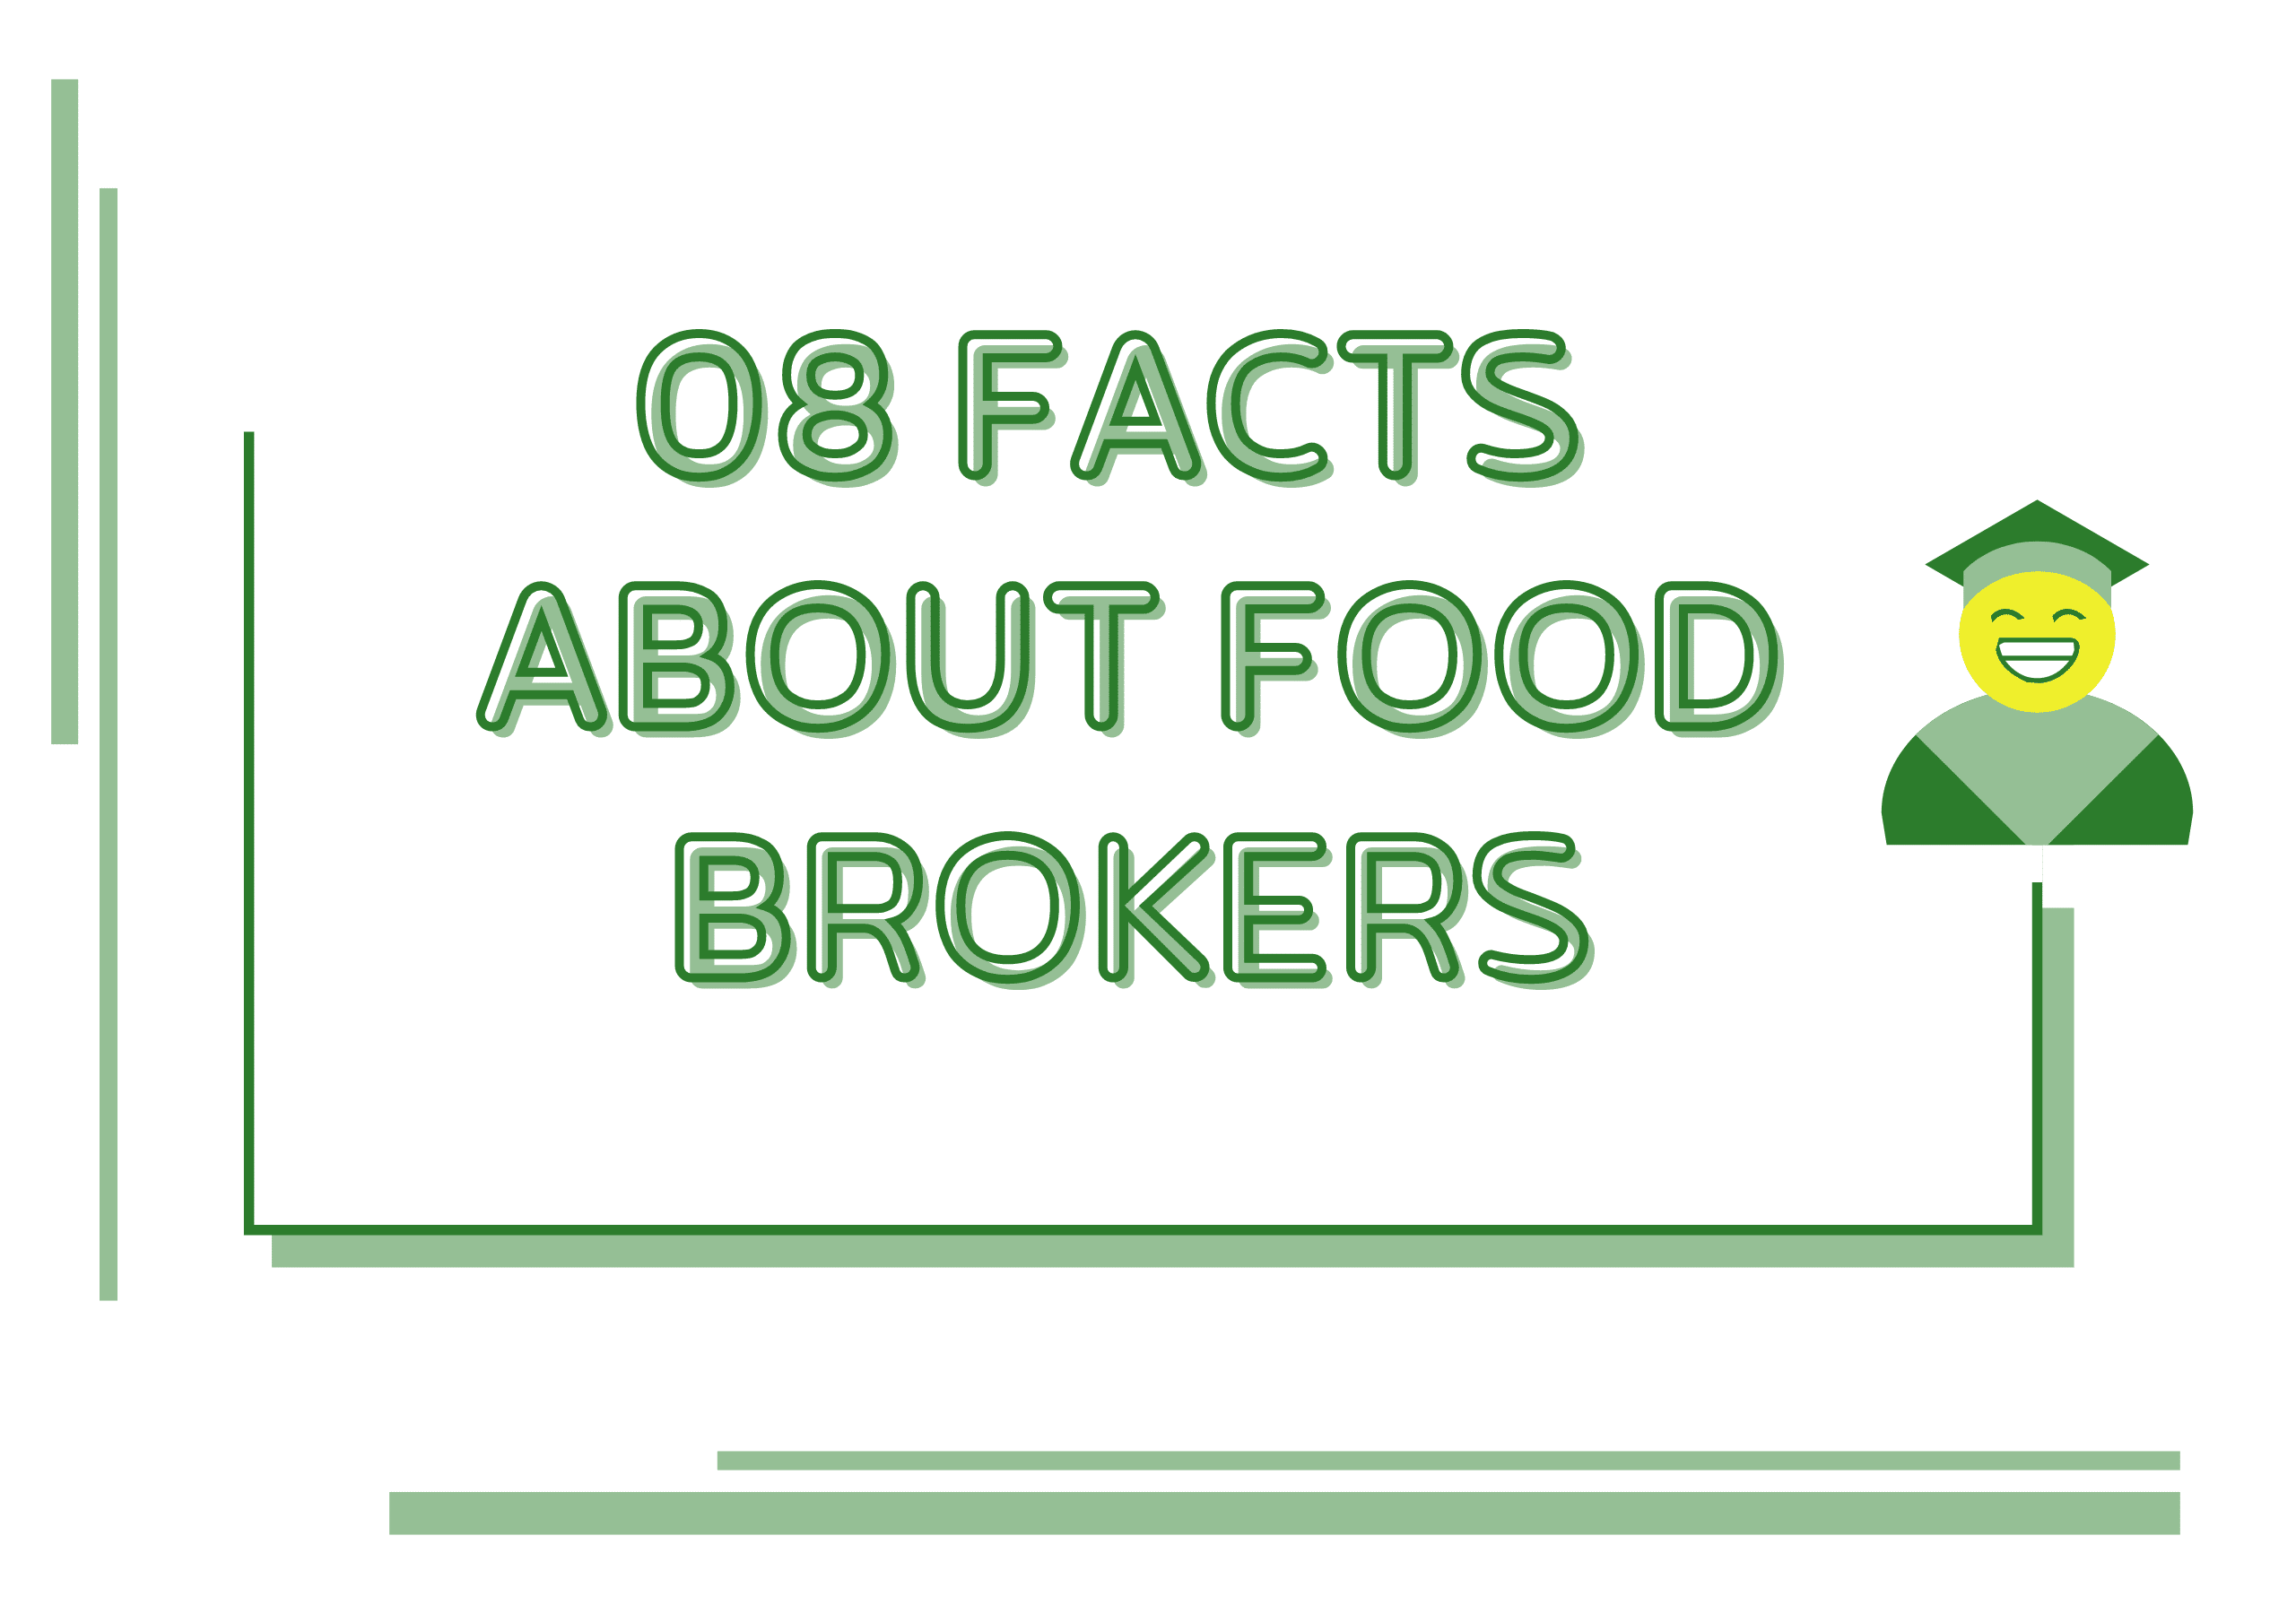 An infographic titled '8 Facts About Food Brokers' featuring a smiling face with a graduation cap icon